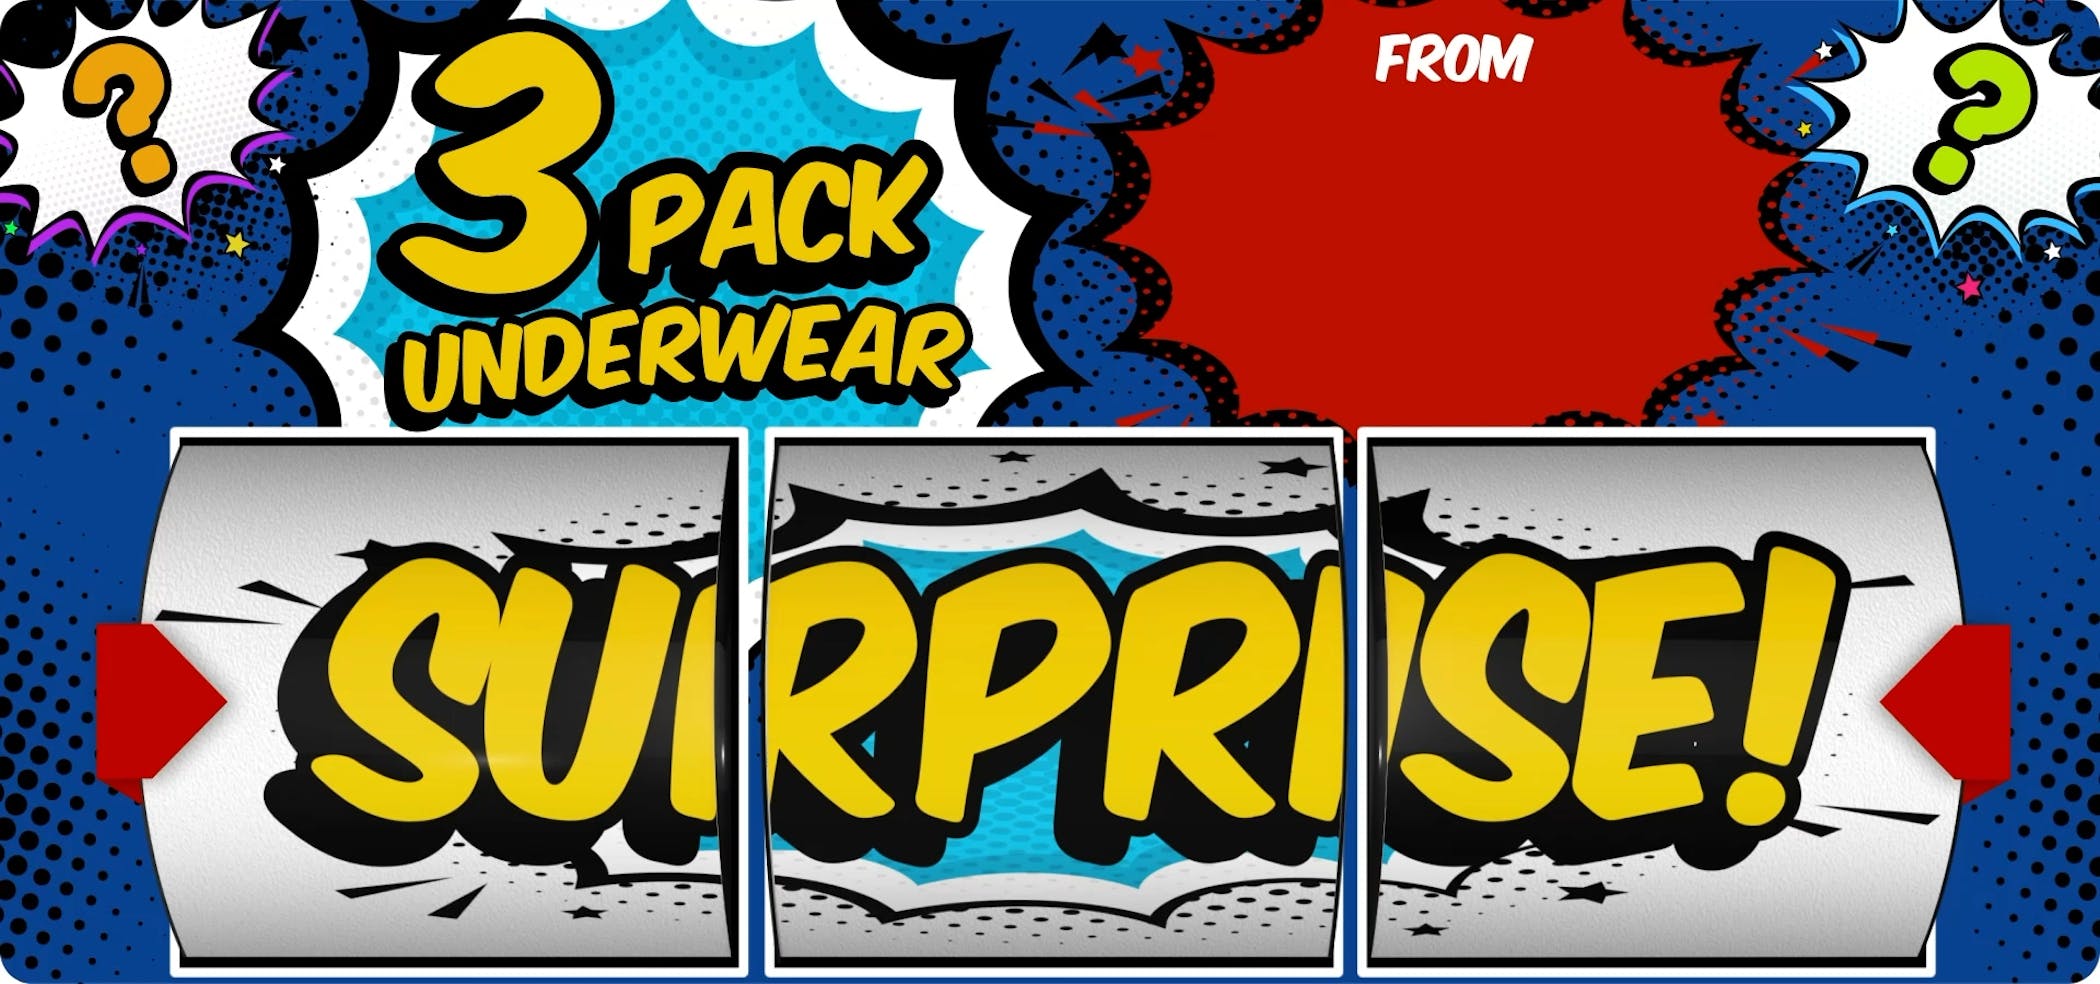 3 Pack Surprise Promo-Xsxxl Homepage Image